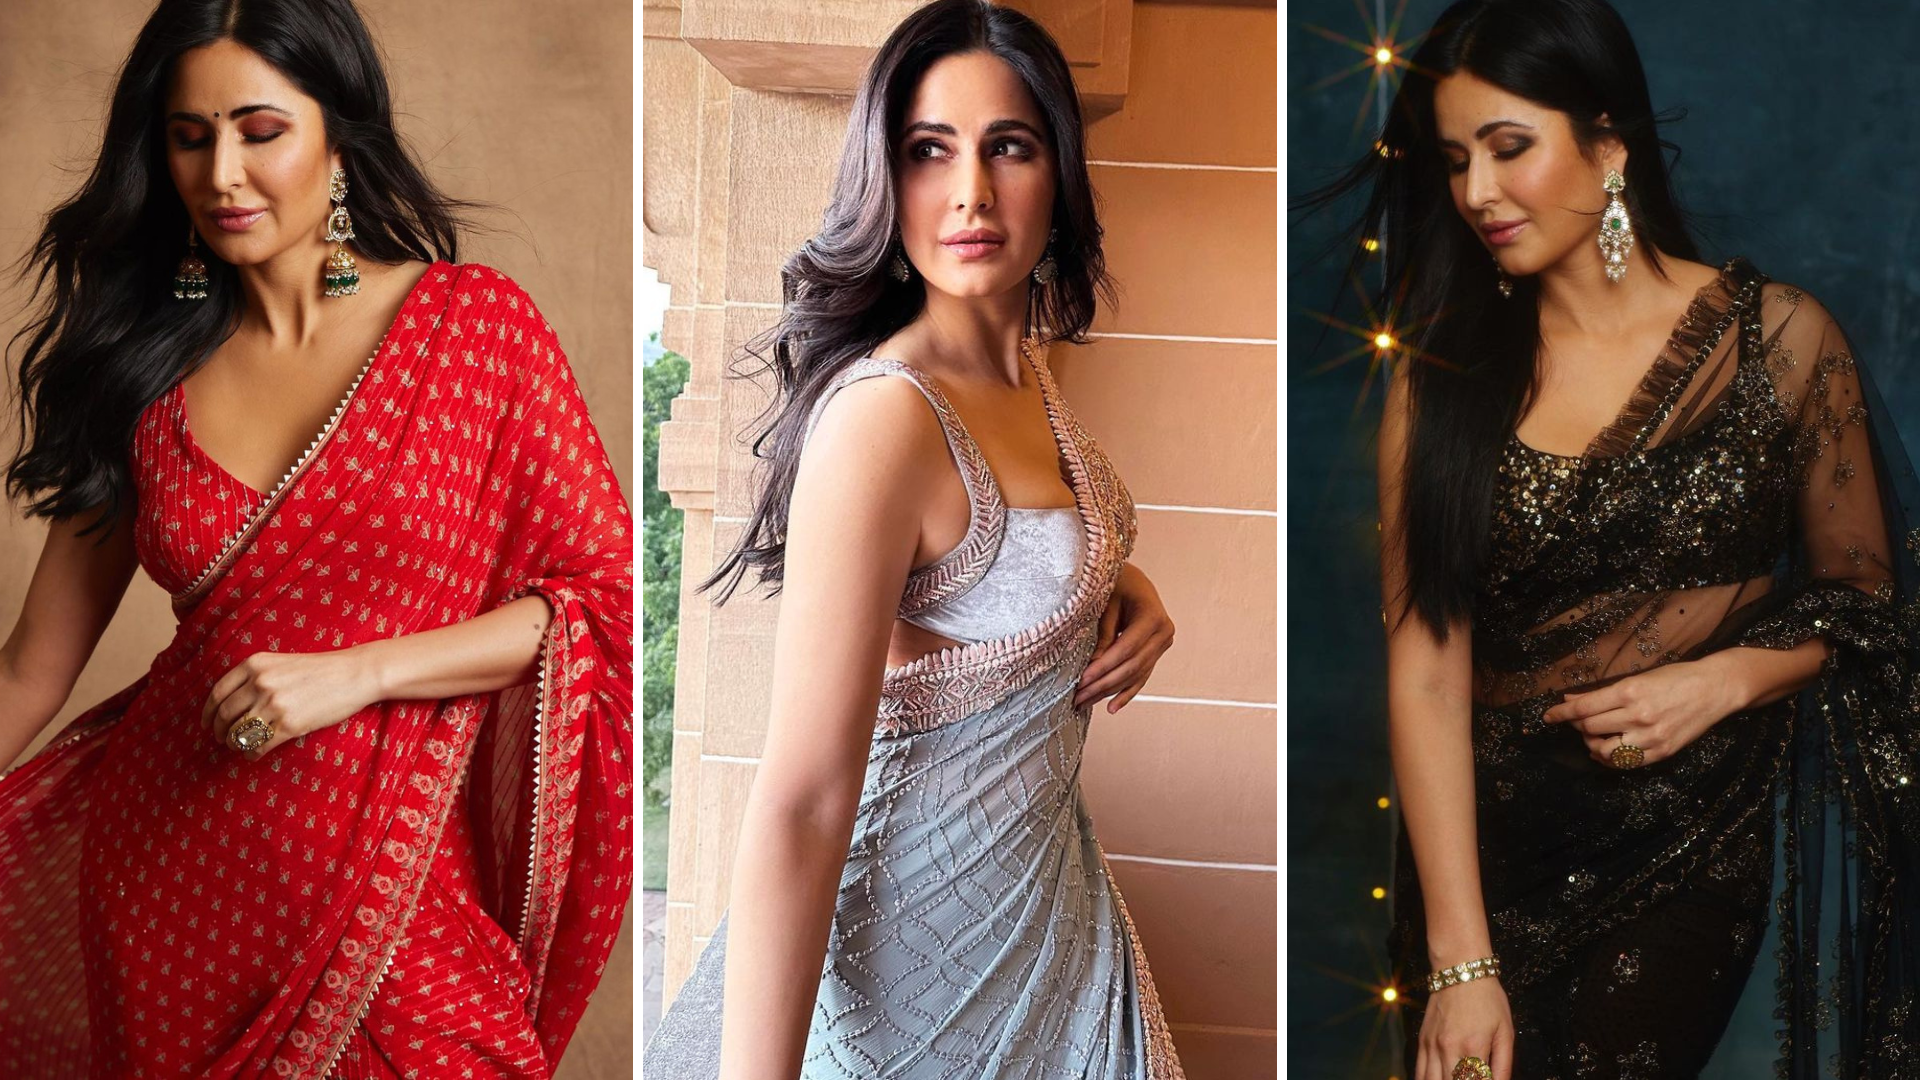 Katrina Kaif's sultry saree game with strappy blouses is a must-see for ethnic fashionistas, and we're completely smitten.